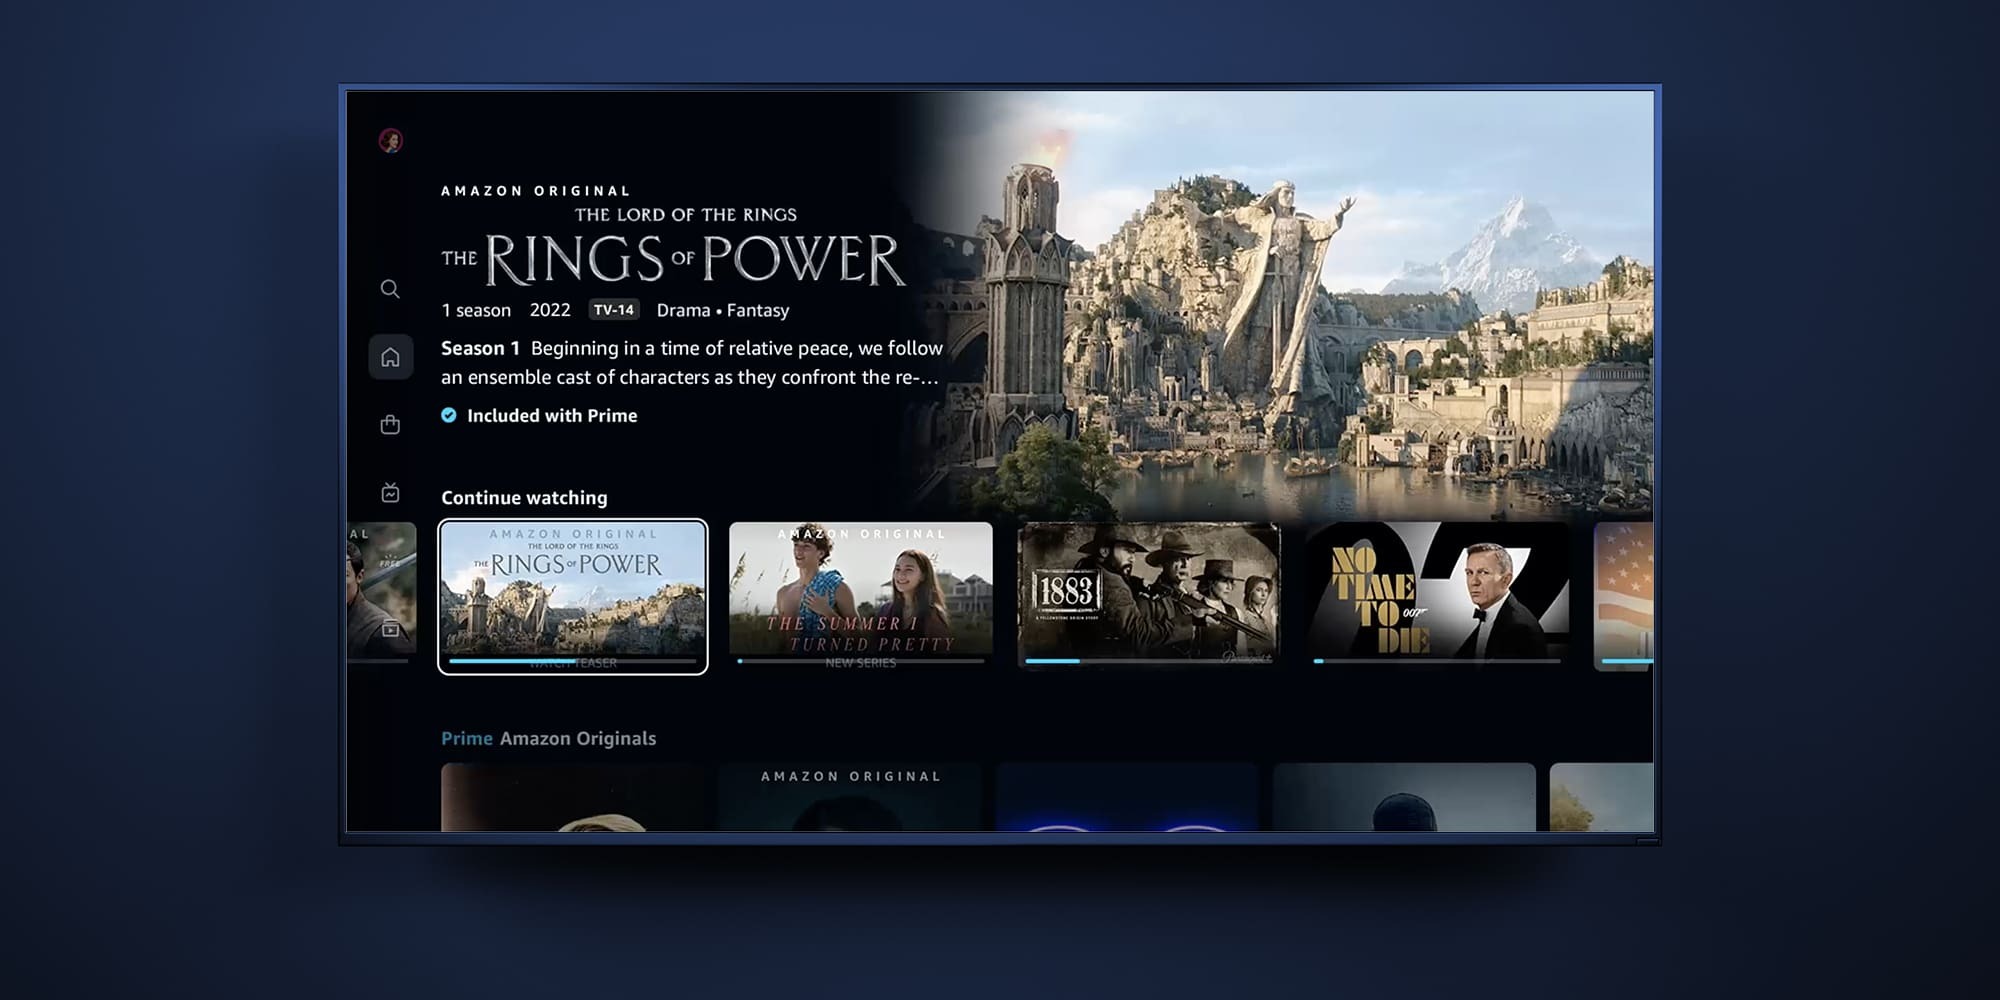 Amazon Video redesign to Apple TV later this